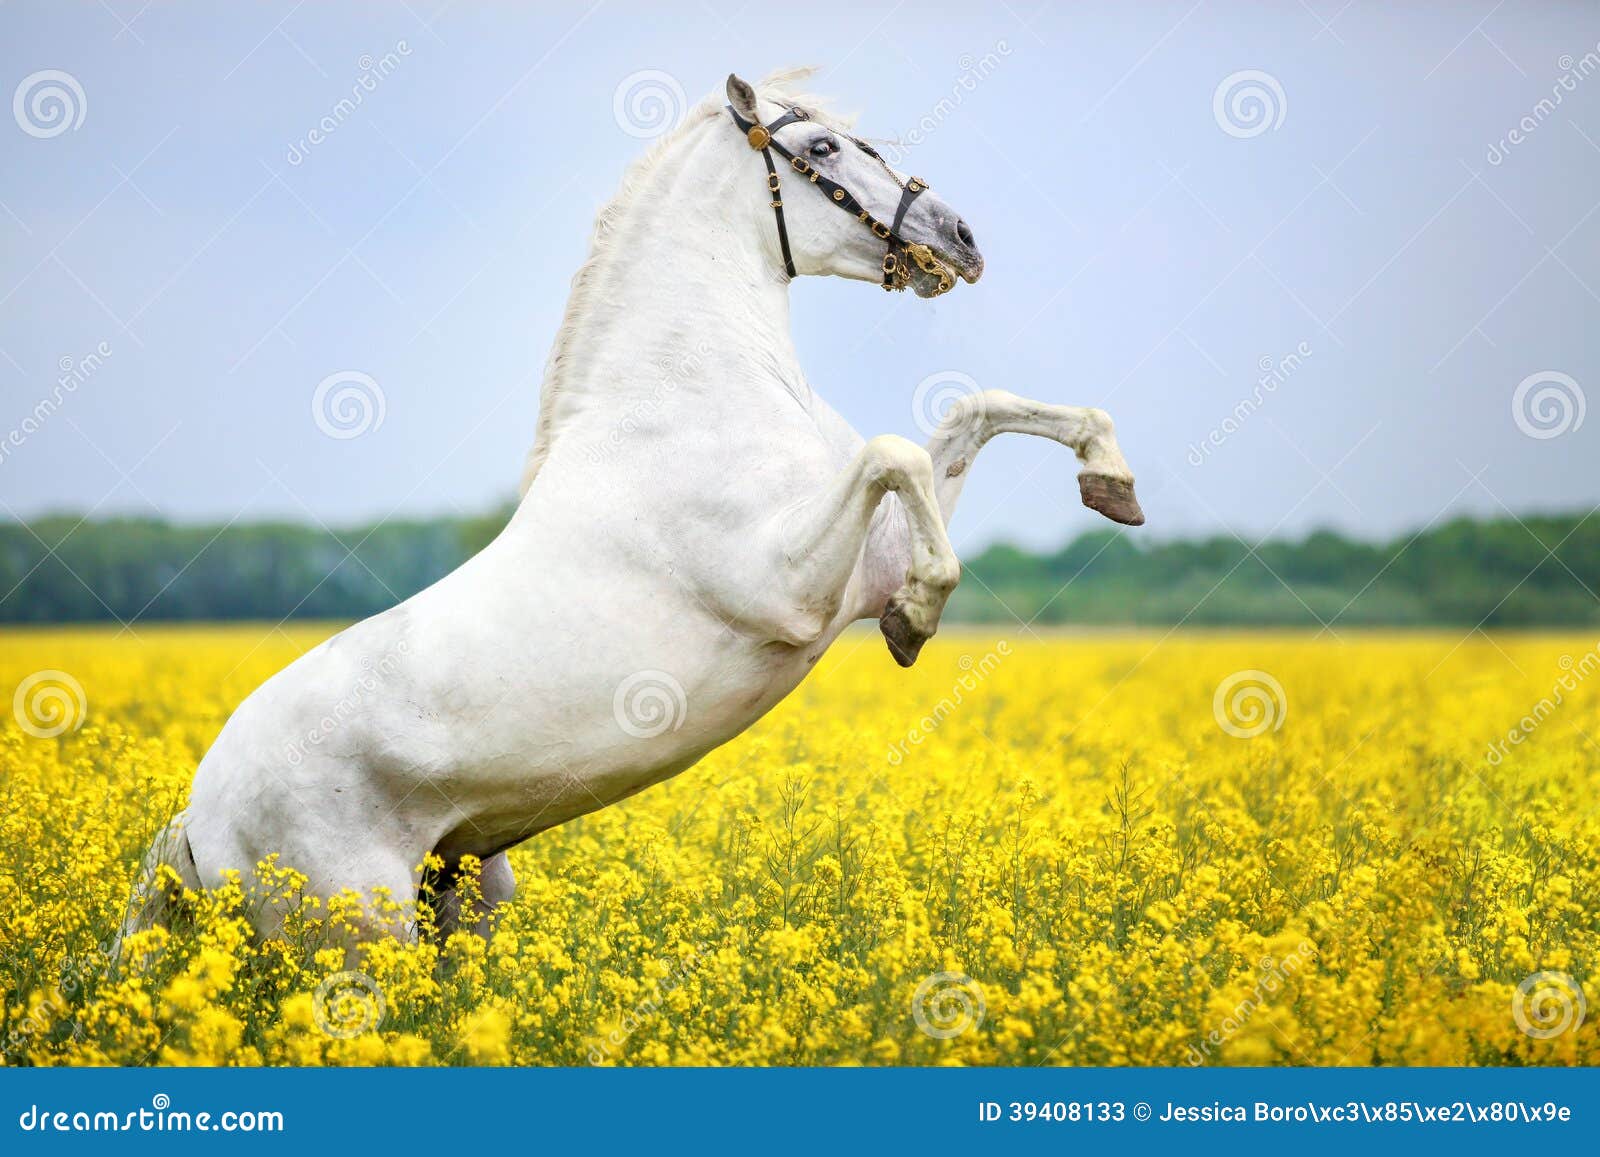 white andalusian rearing